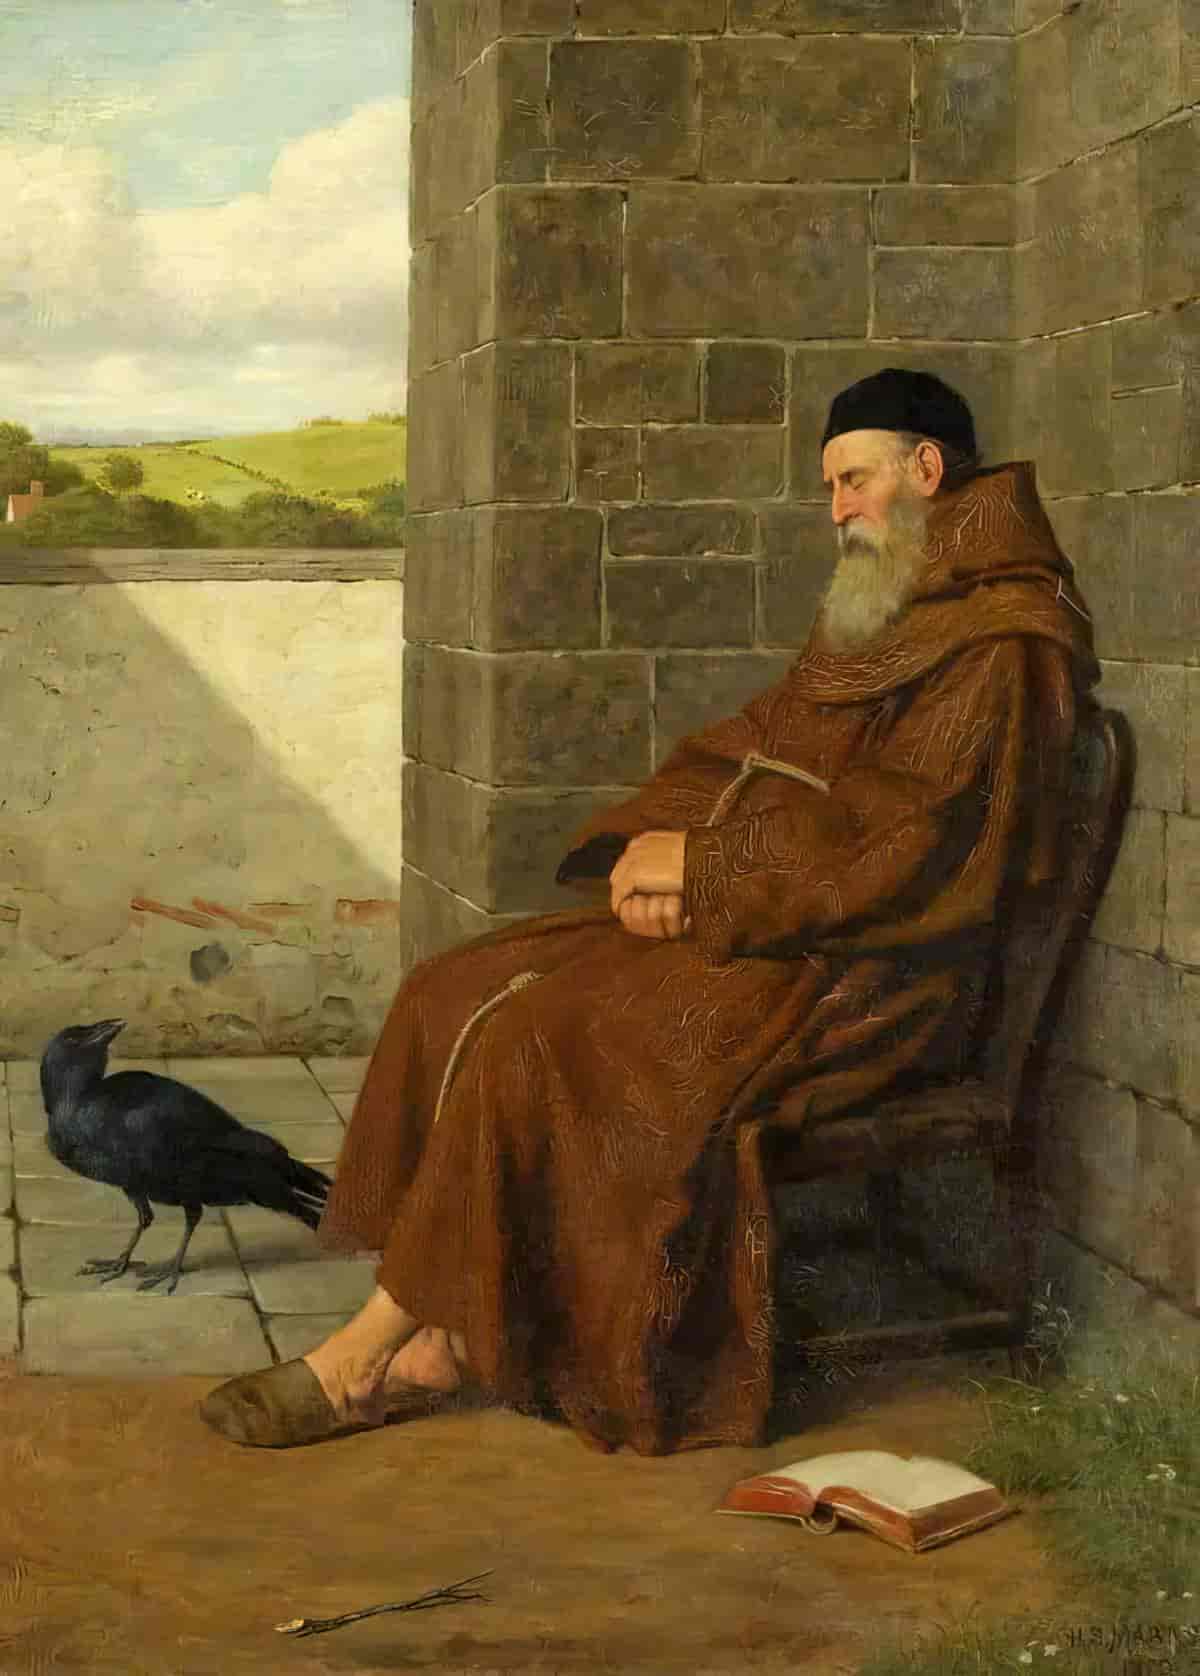 man in brown monk's robe sitting in contemplation with an open book at his feet and a black raven looking up at him from the ground